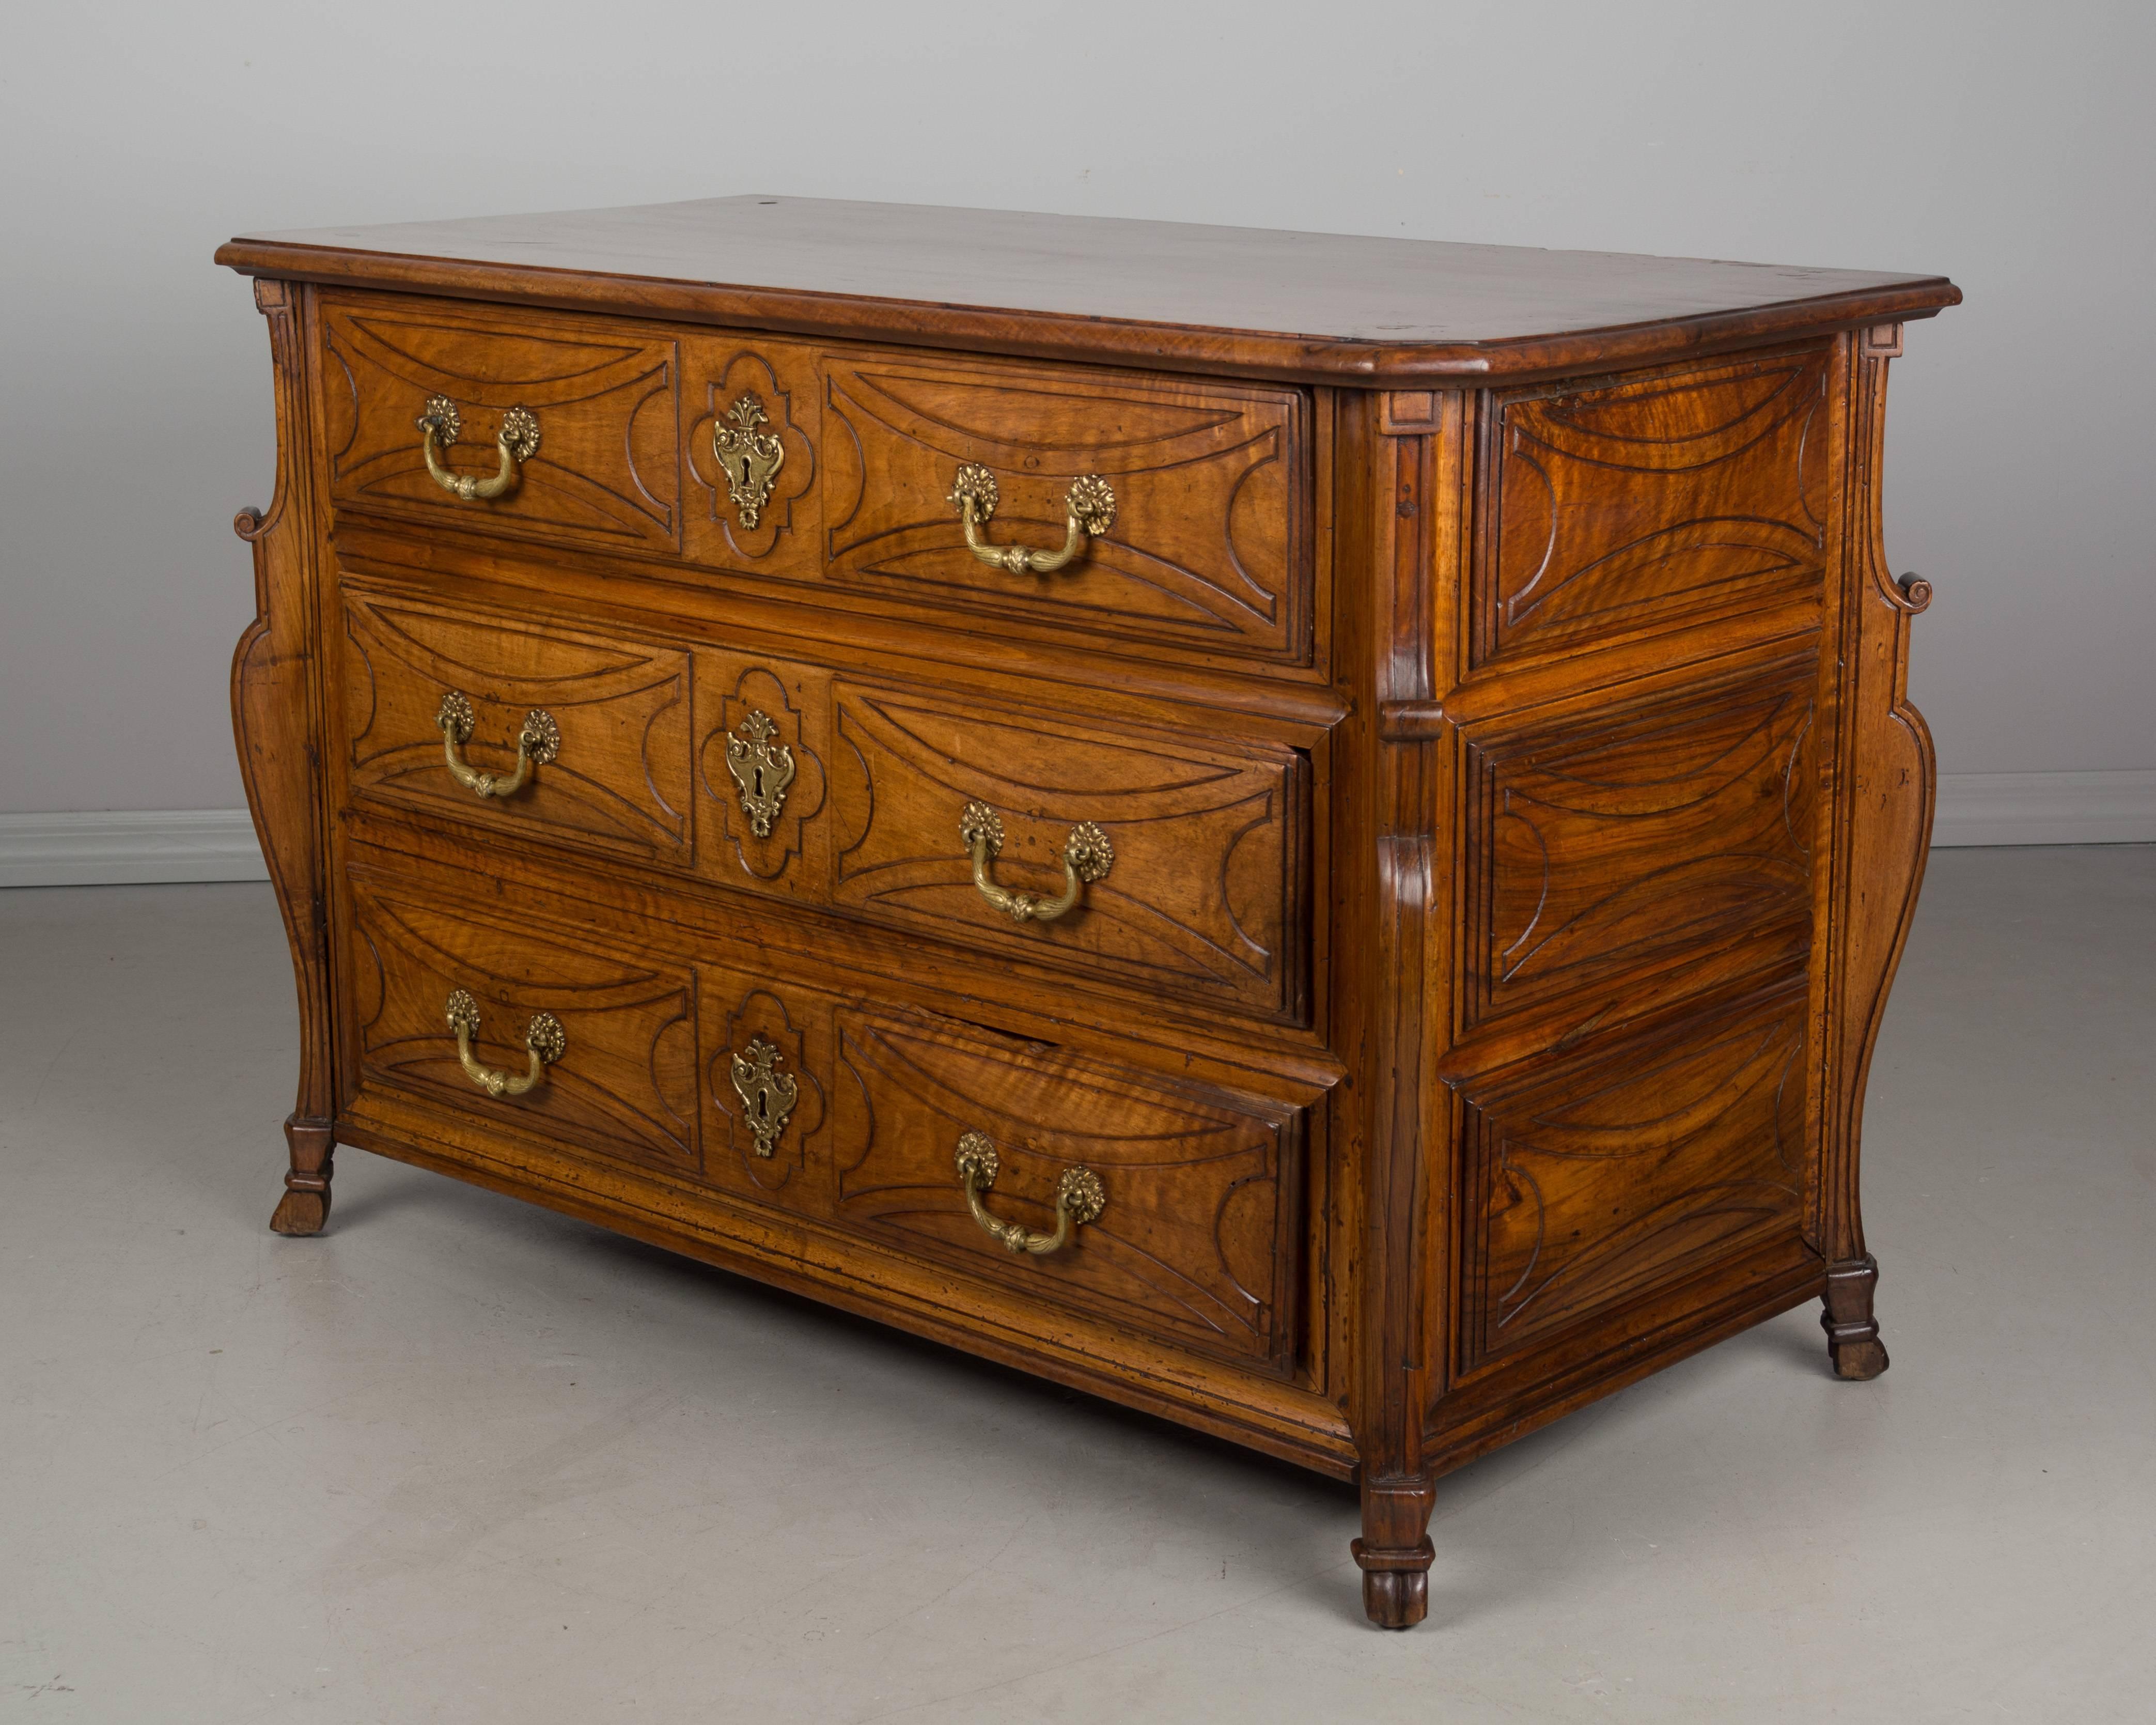 A fine 18th century Louis XVI commode from the town of Castres the Southwest of France and in a style that is typical of this region. Made of solid walnut with three dovetailed drawers and three raised panels on the sides, all convex surfaces with